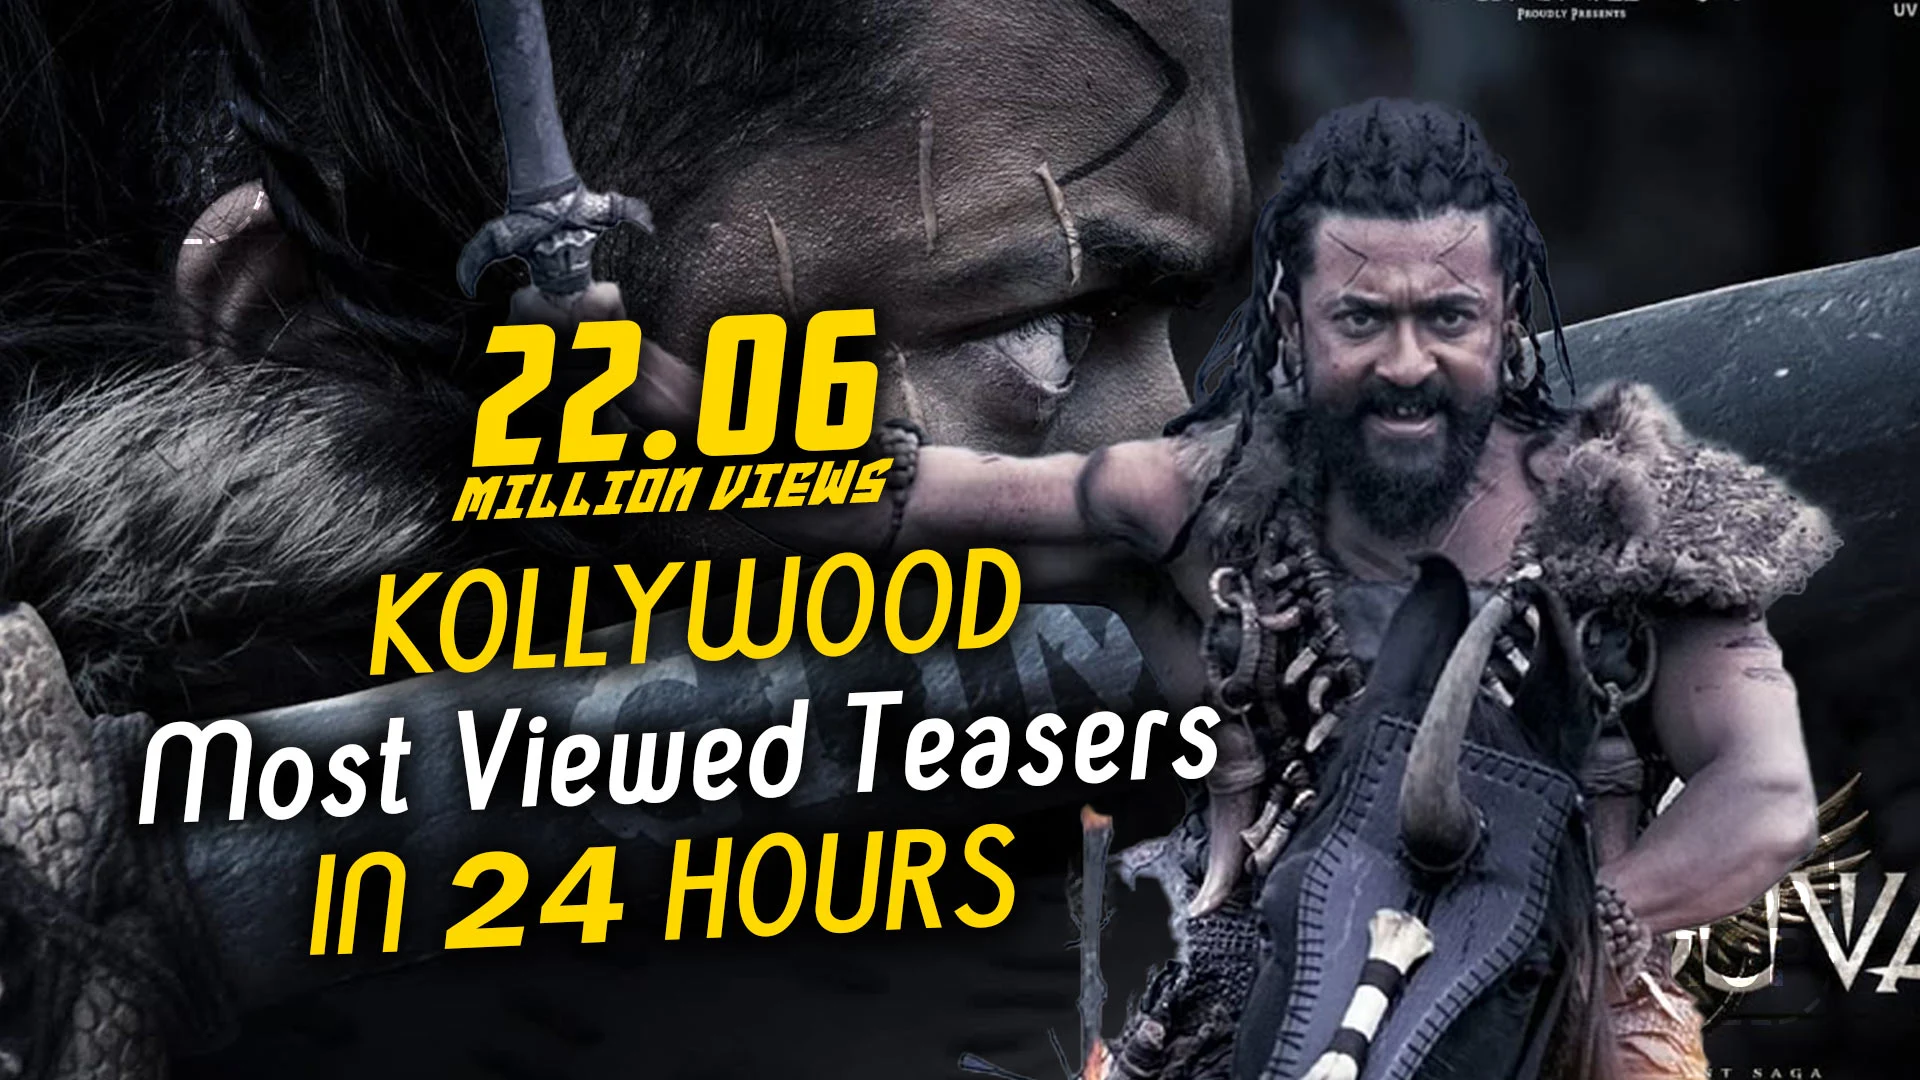 Kollywood Most Viewed Teasers in 24 Hours